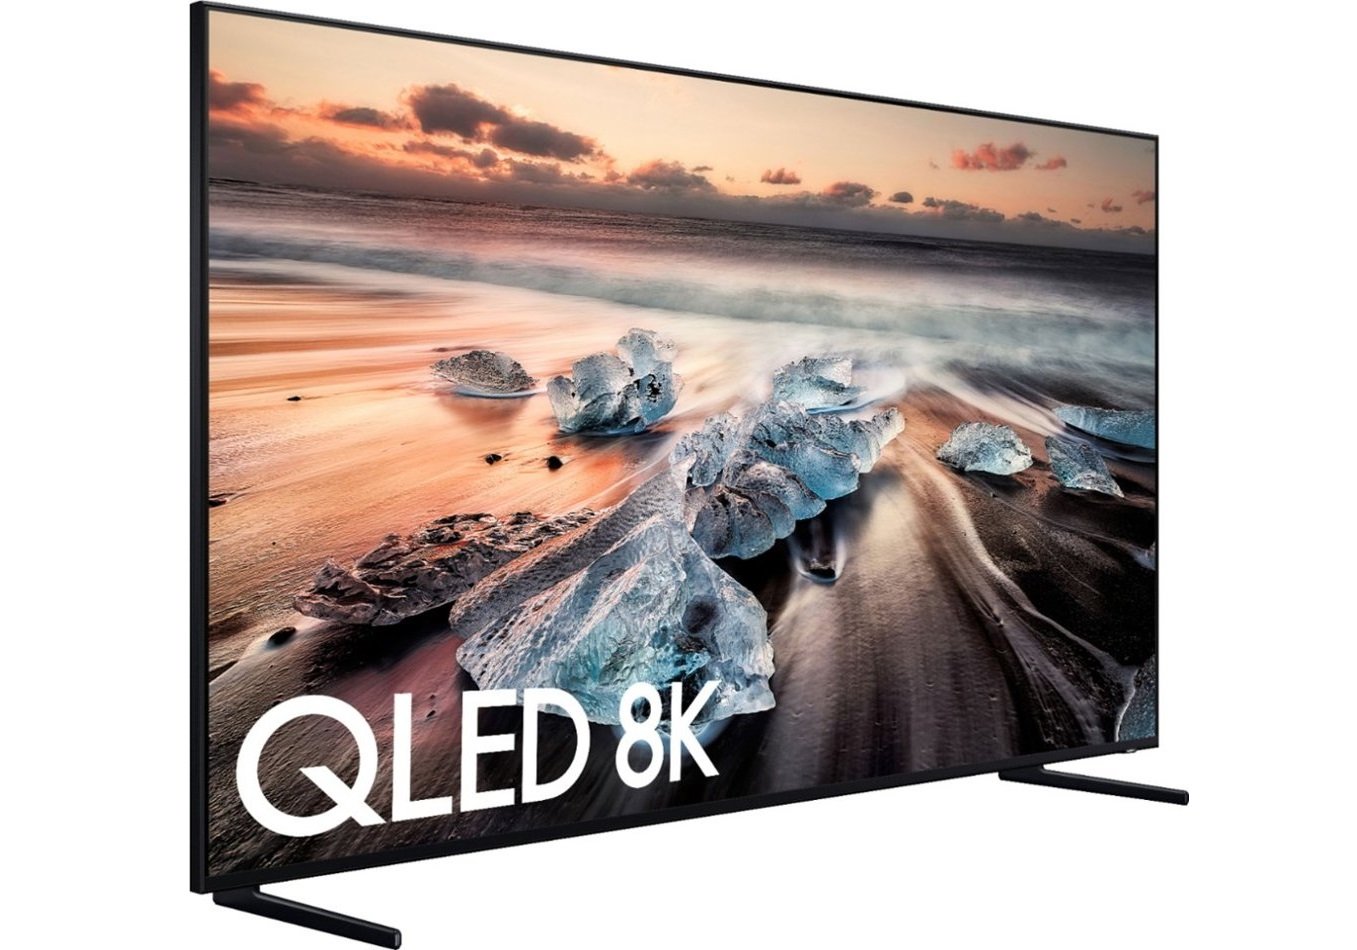 Peer Into Future: The Best 8K HDTVs Today The National Interest